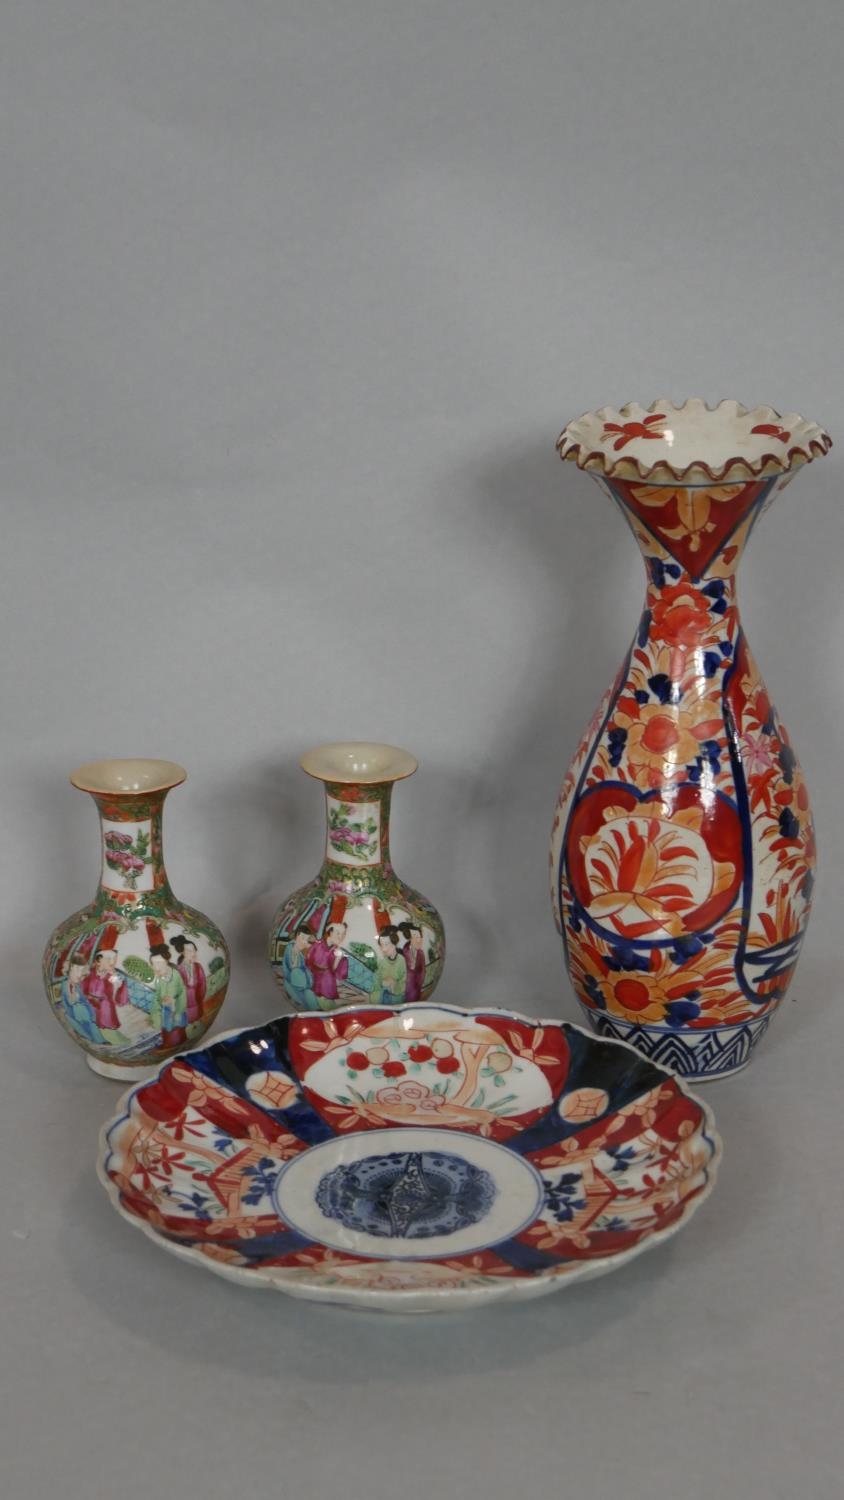 An Imari style plate and a similar vase with flared neck along with a pair of Famille Vert bulbous